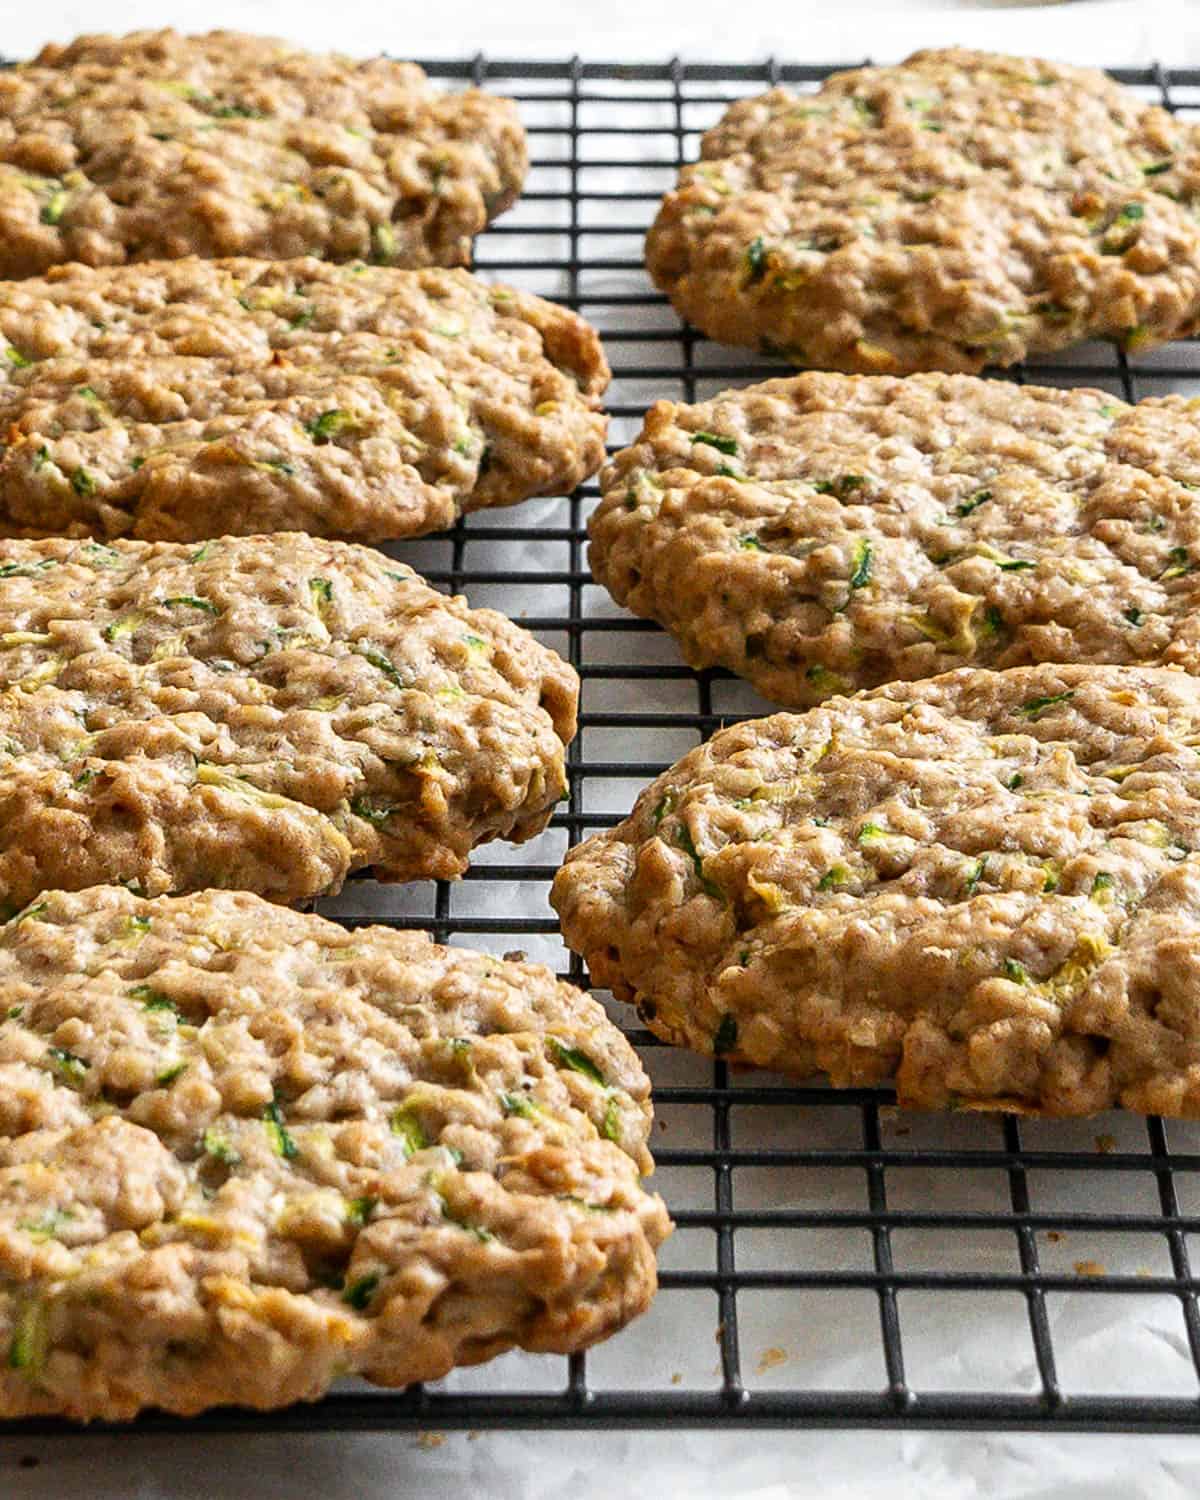 completed Oatmeal Zucchini Cookies on wire rack